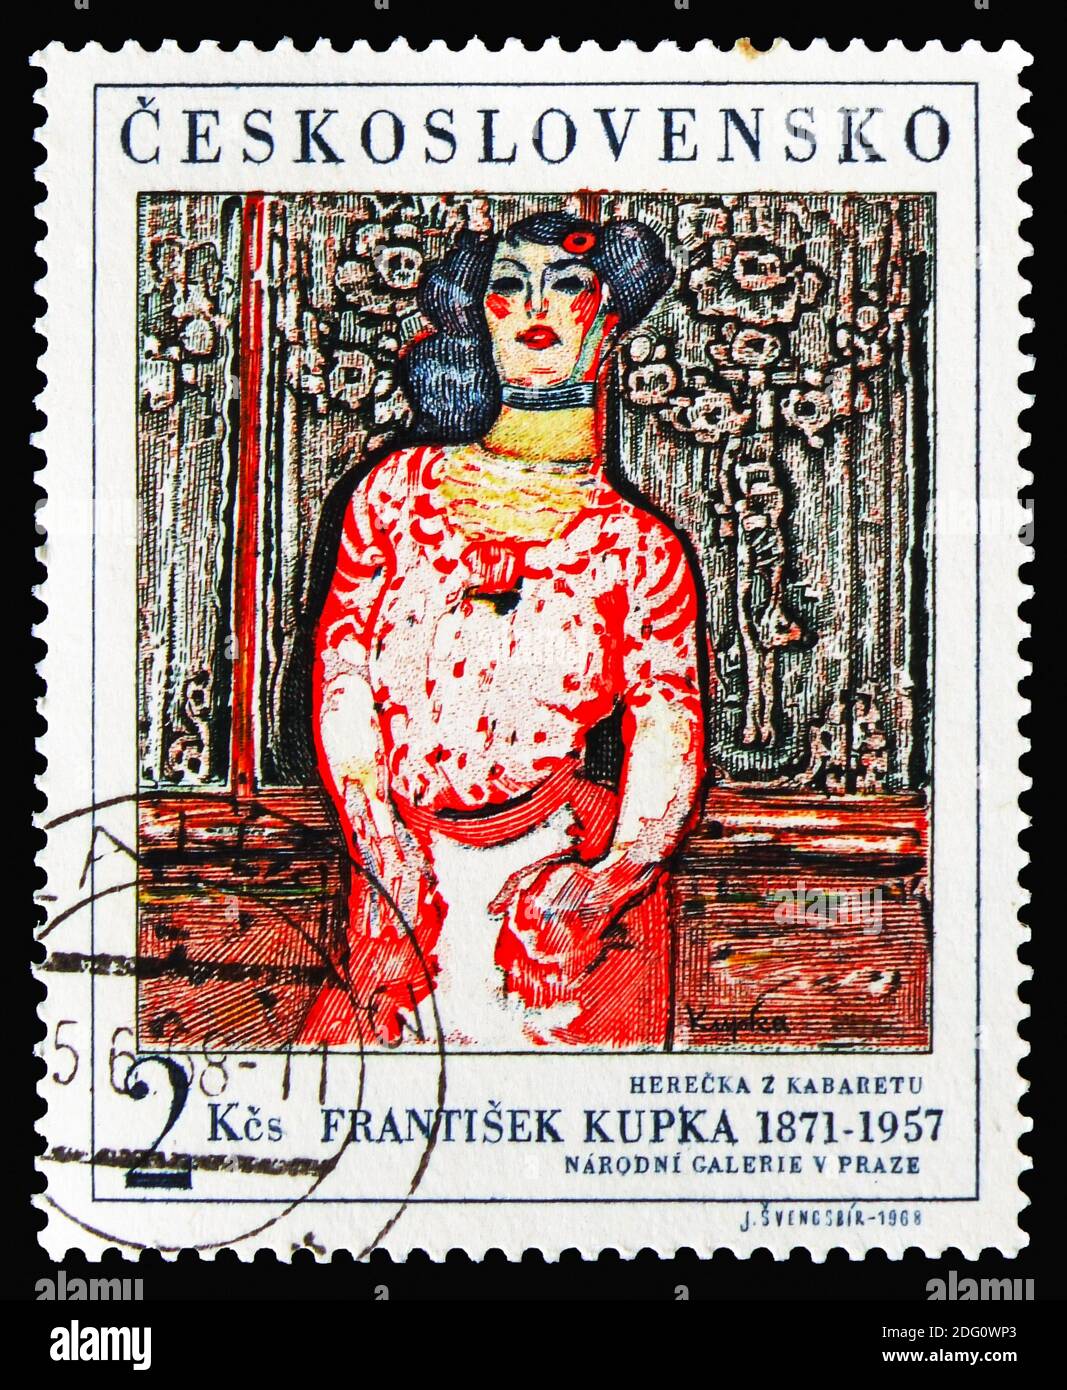 MOSCOW, RUSSIA - AUGUST 18, 2018: A stamp printed in Czechoslovakia shows Cabaret Performer, by Frantisek Kupka, New Prag serie, circa 1968 Stock Photo